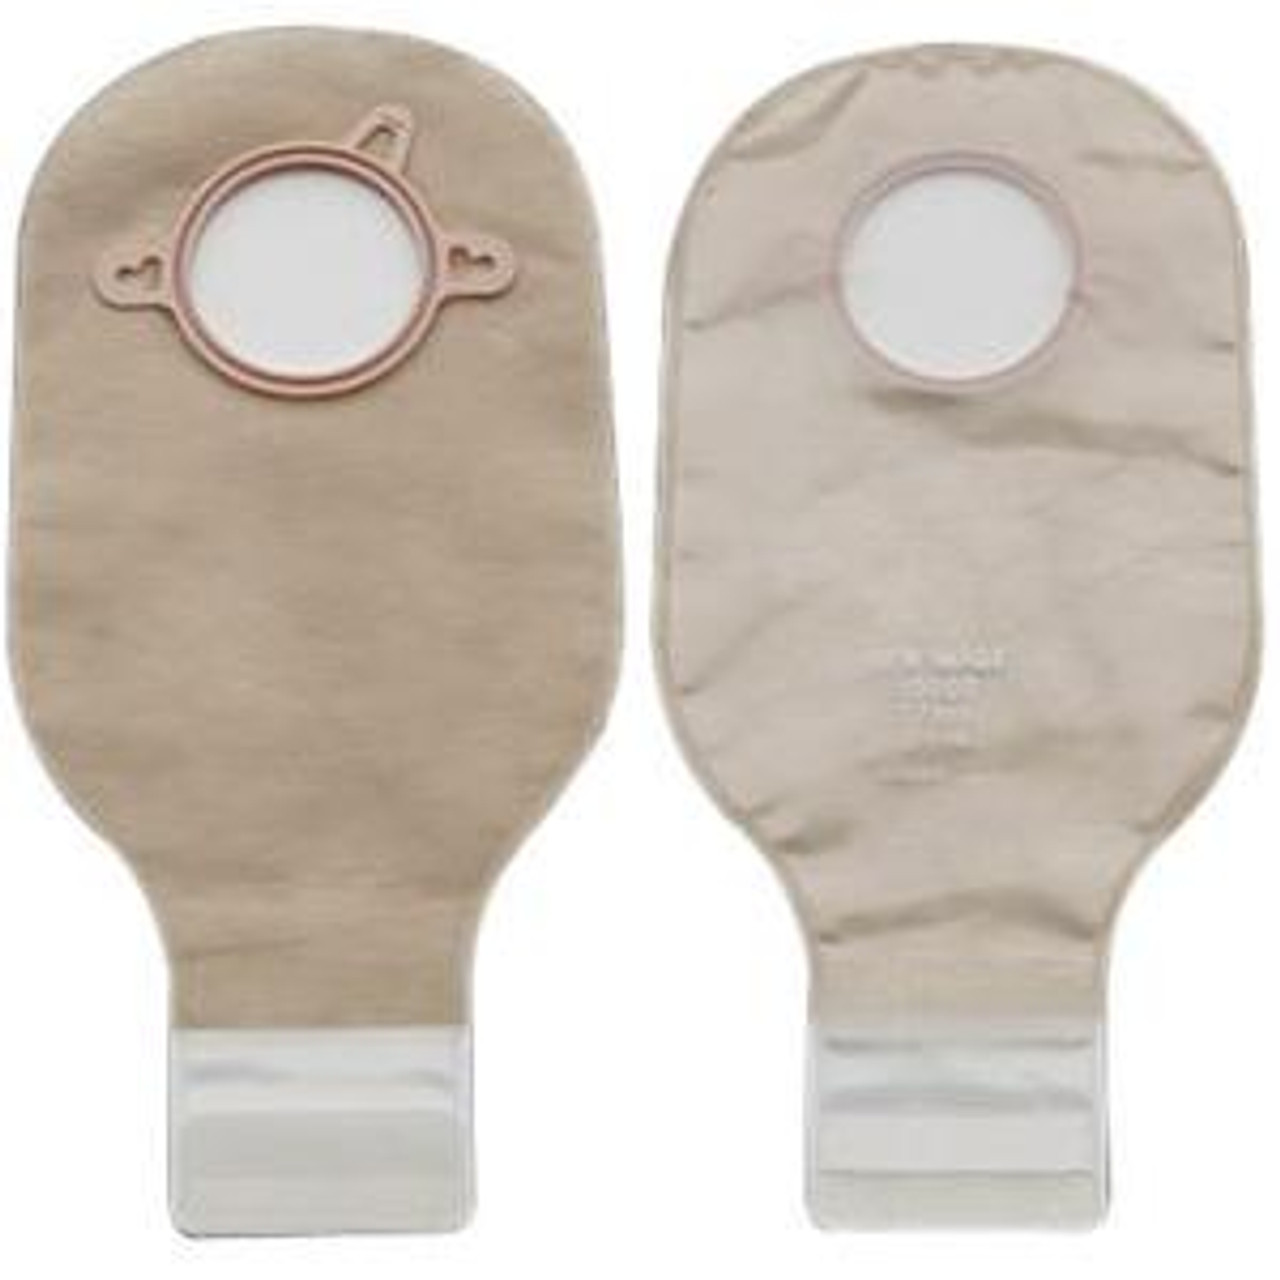 18004 Hollister New Image Drainable Ostomy Pouch